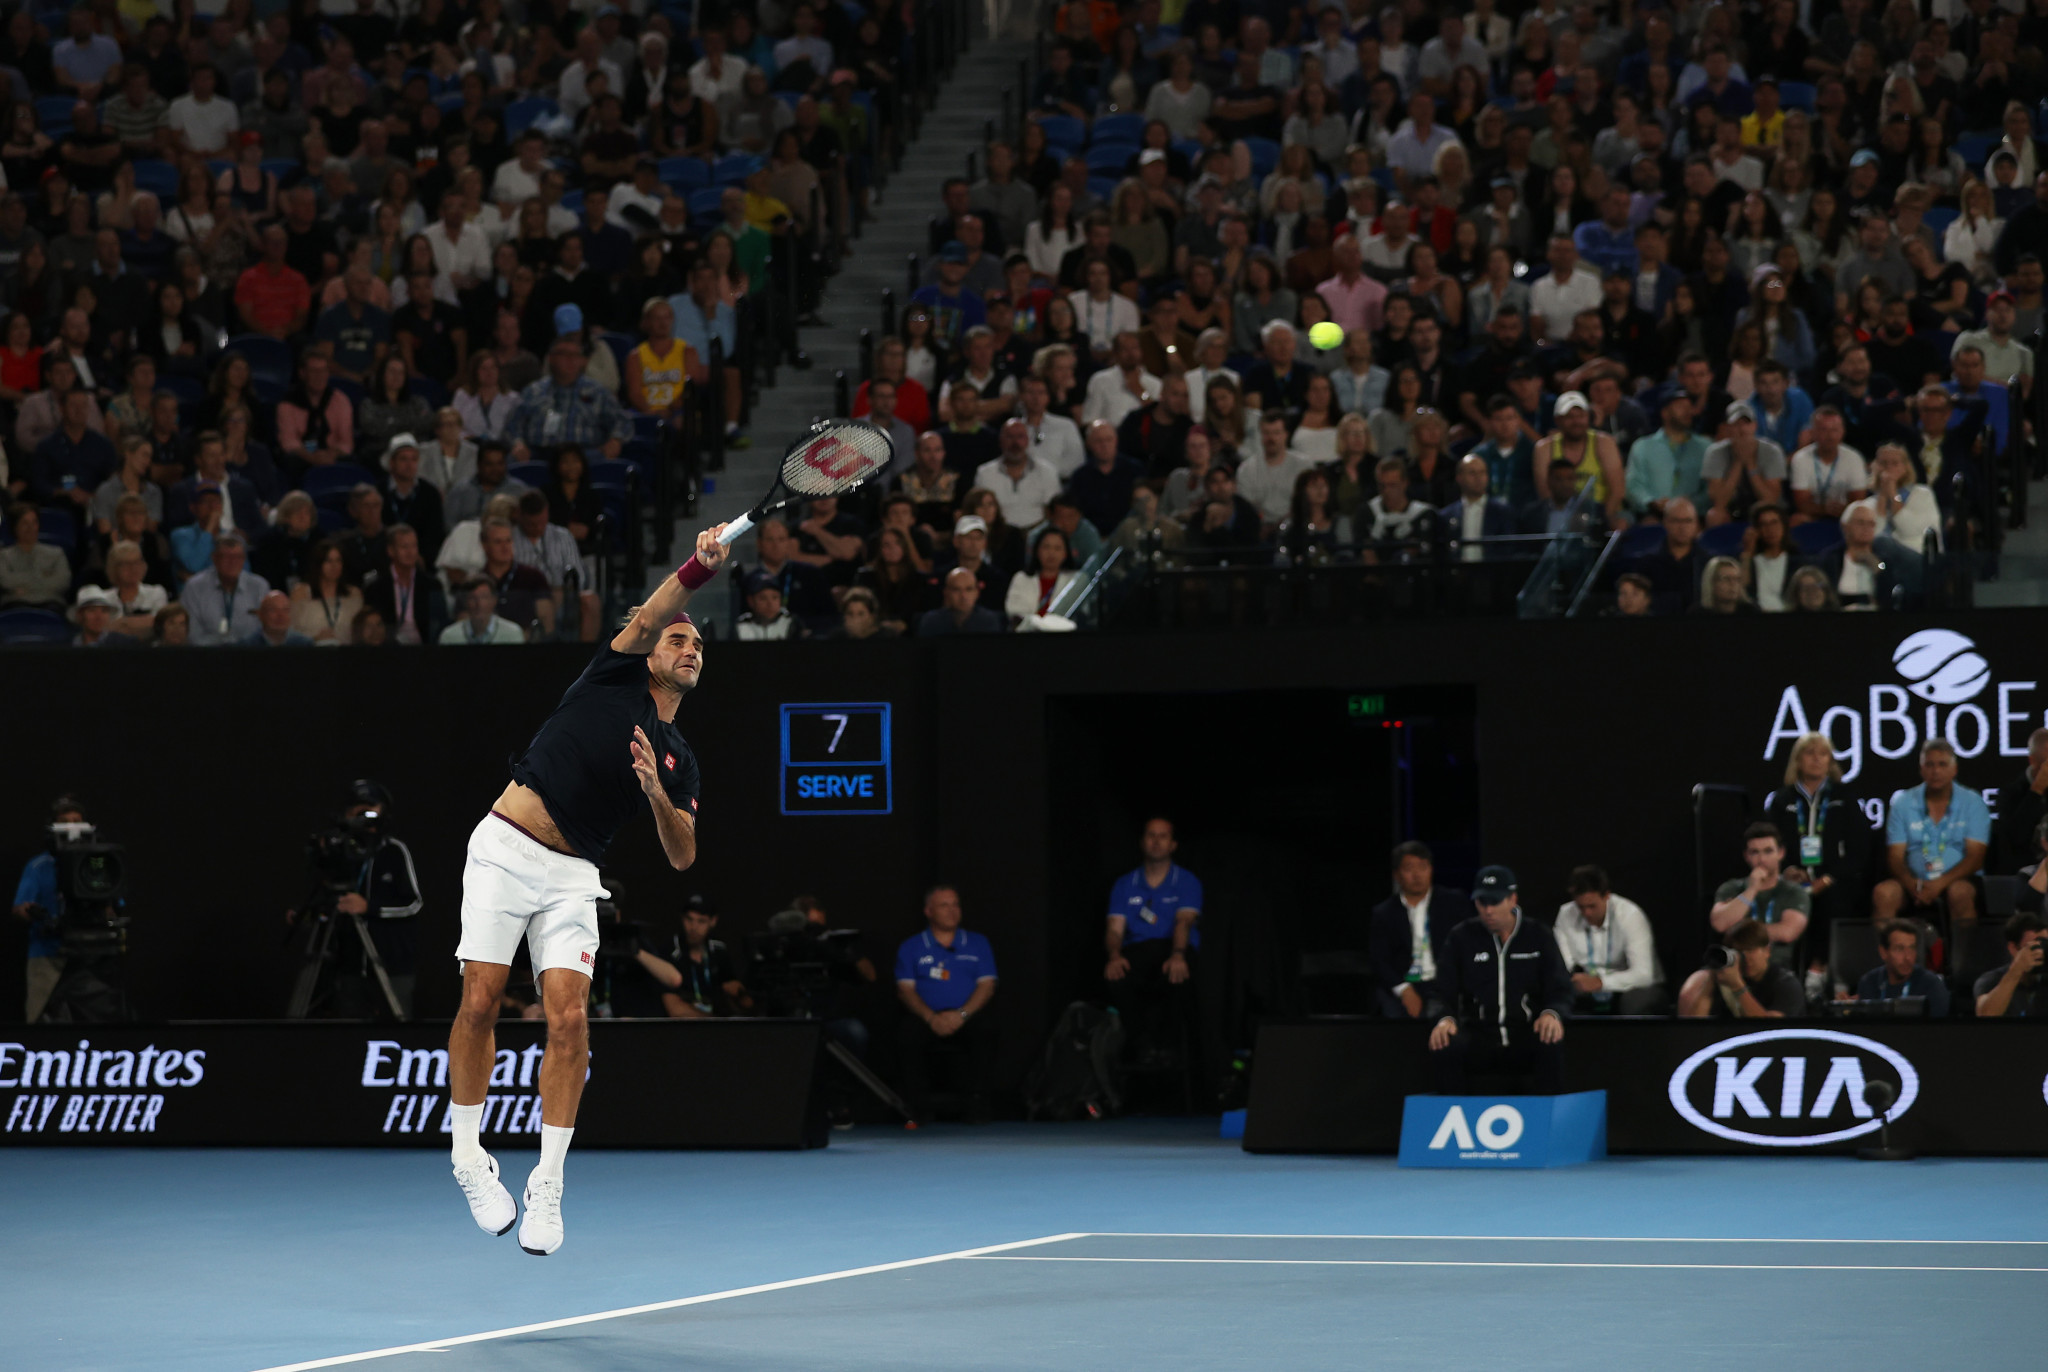 It was a five-set thriller, however, with Federer just edging it 4-6, 7-6, 6-4, 4-6, 7-6 ©Getty Images